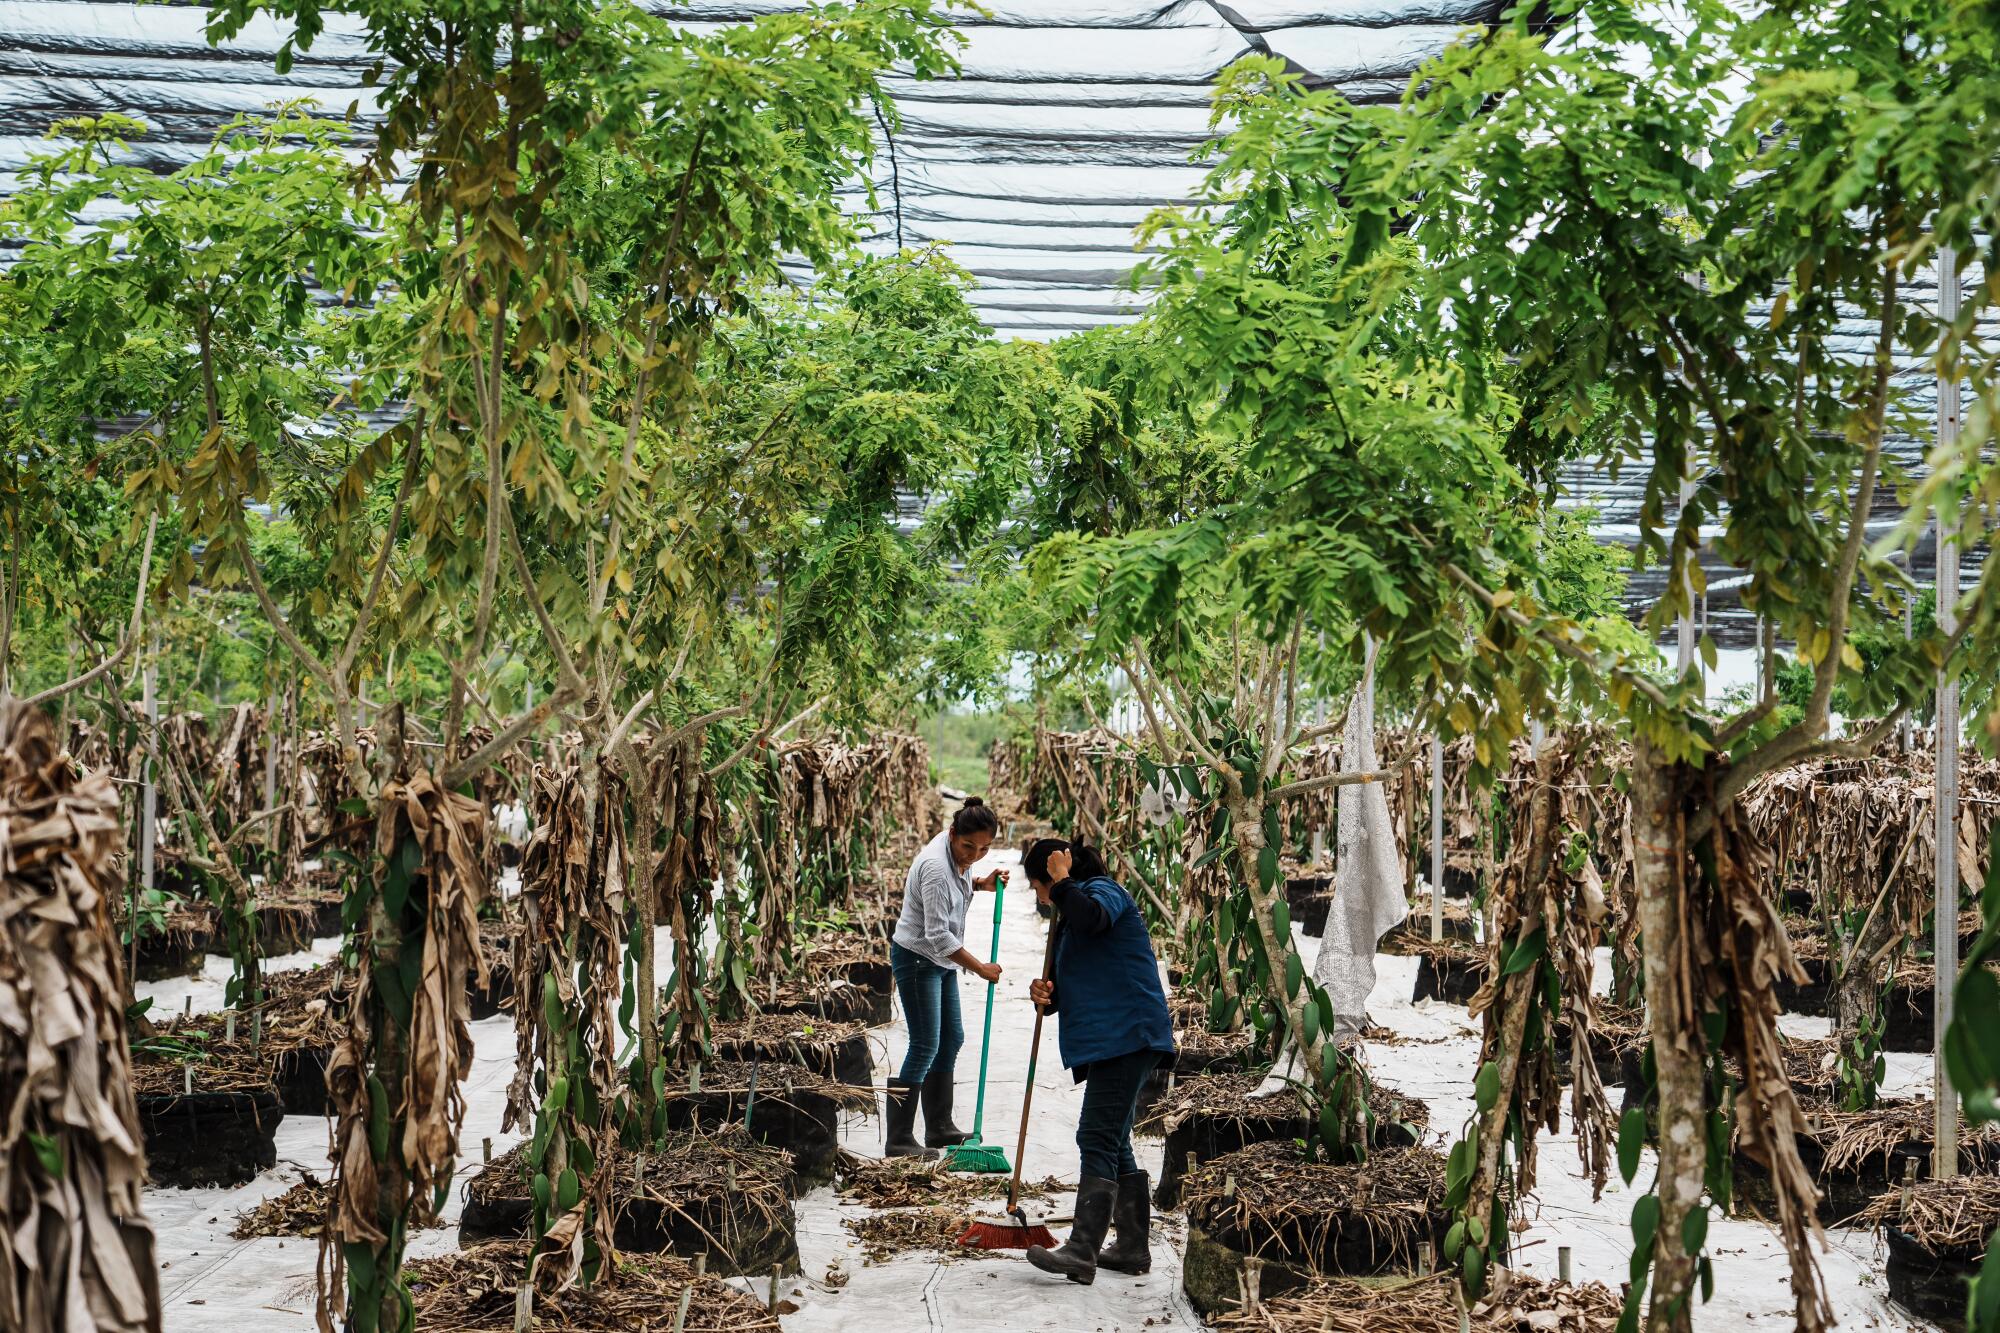 Two people sweep the floor amid plants in a greenhouse 